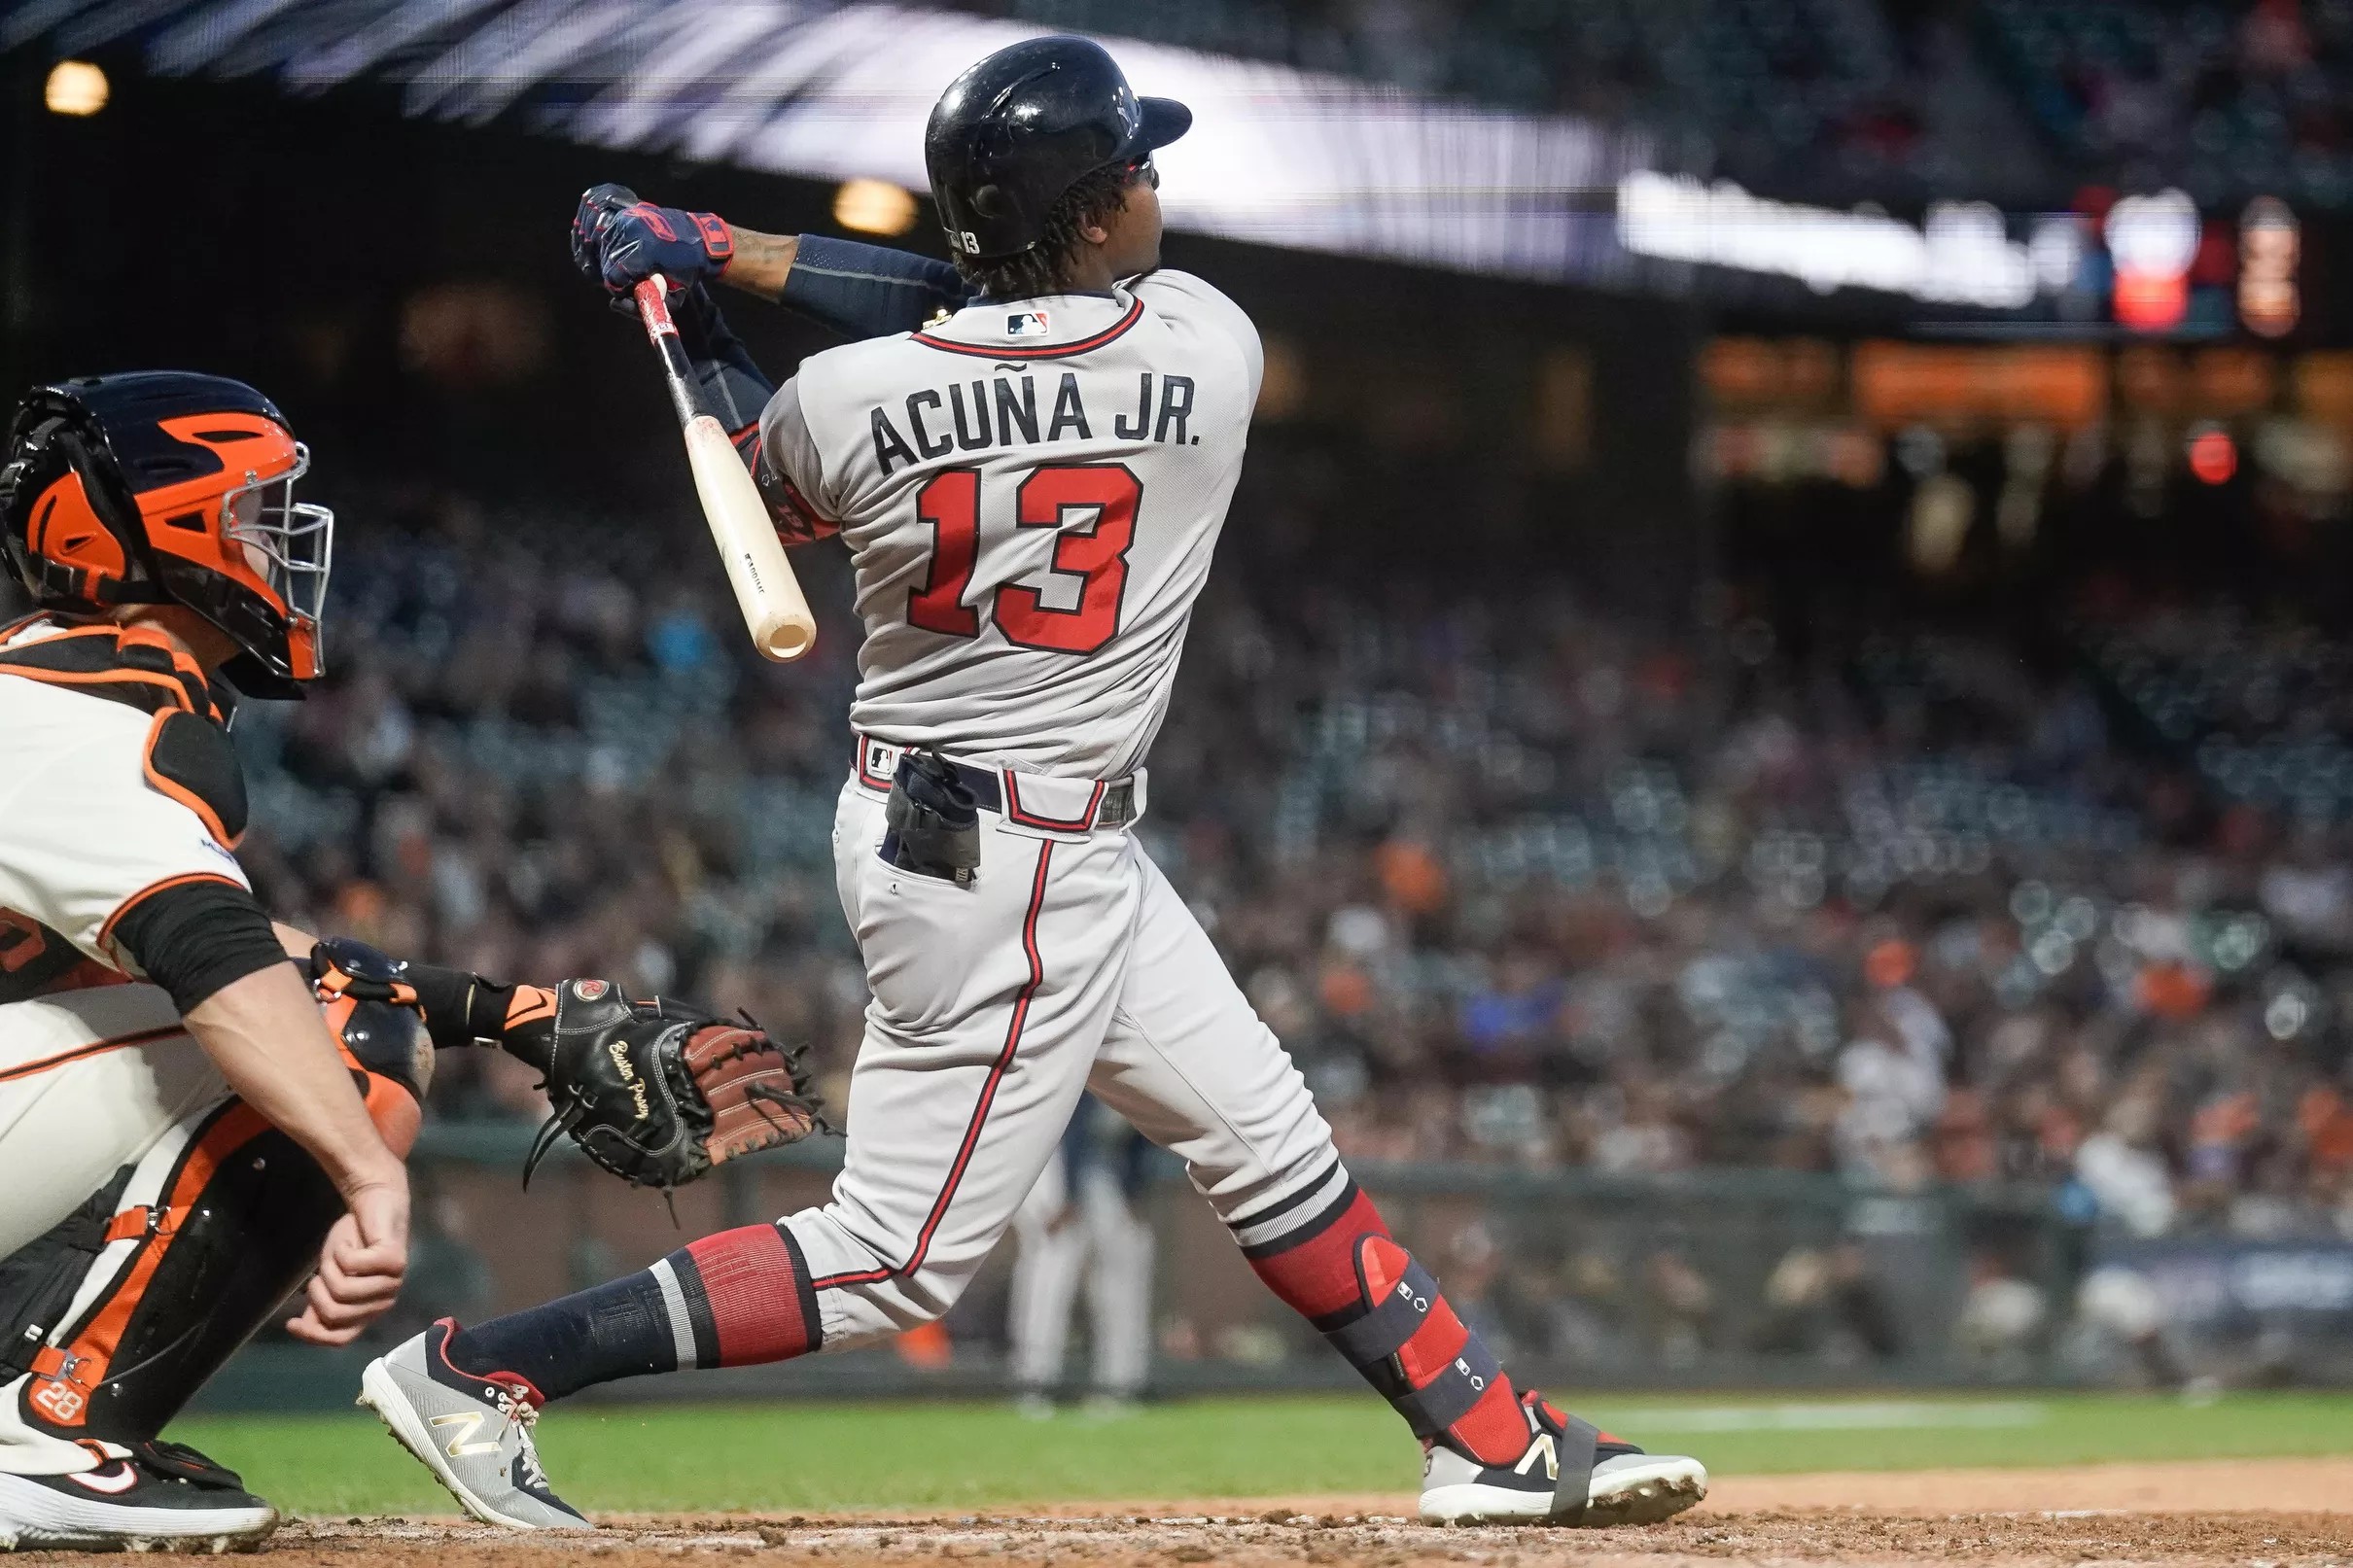 Ronald Acuña Jr. will participate in the Home Run Derby